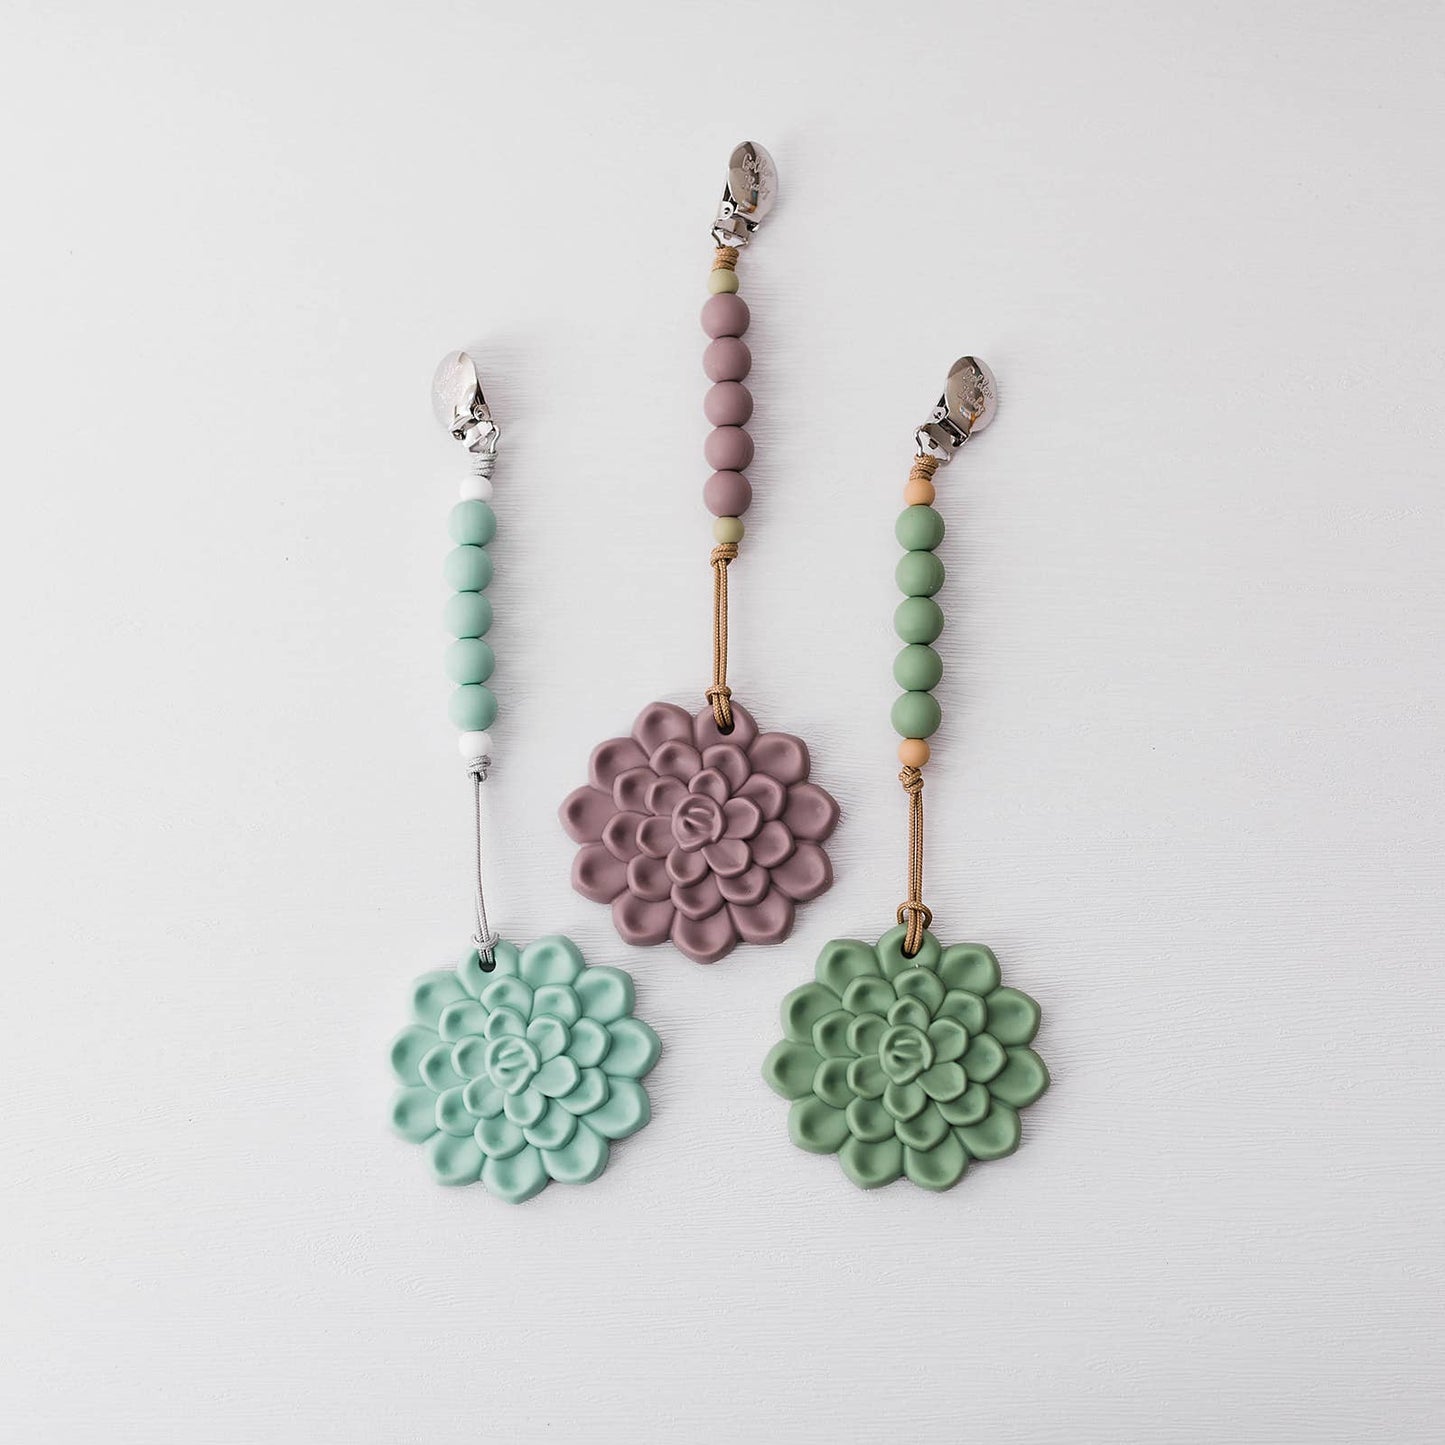 Succulent Teether Set: Teether and Clip Set